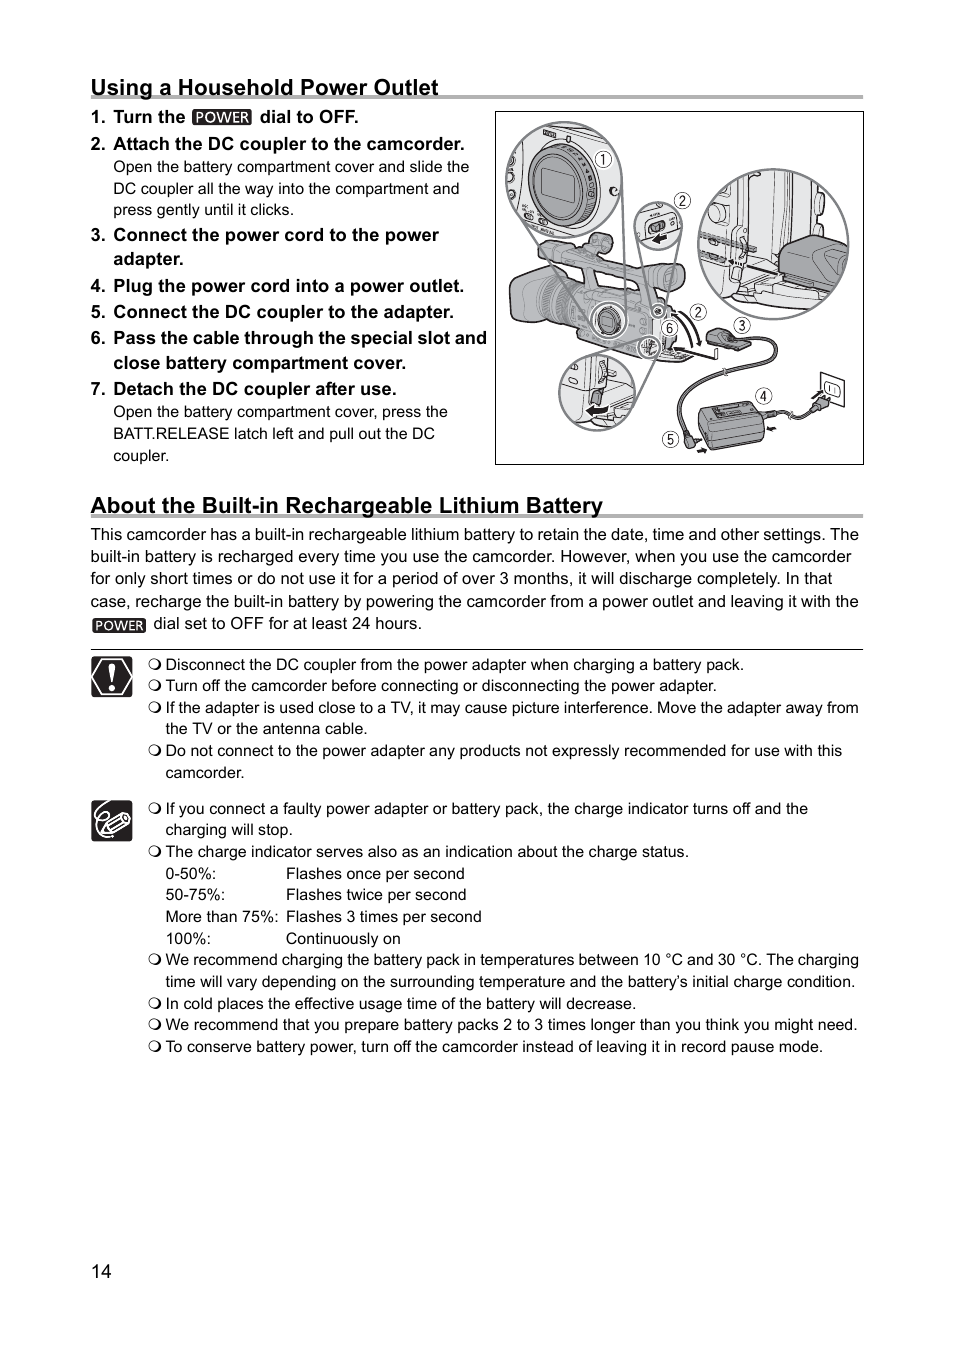 Using a household power outlet, About the built-in rechargeable lithium battery | Canon XH A1 User Manual | Page 14 / 159